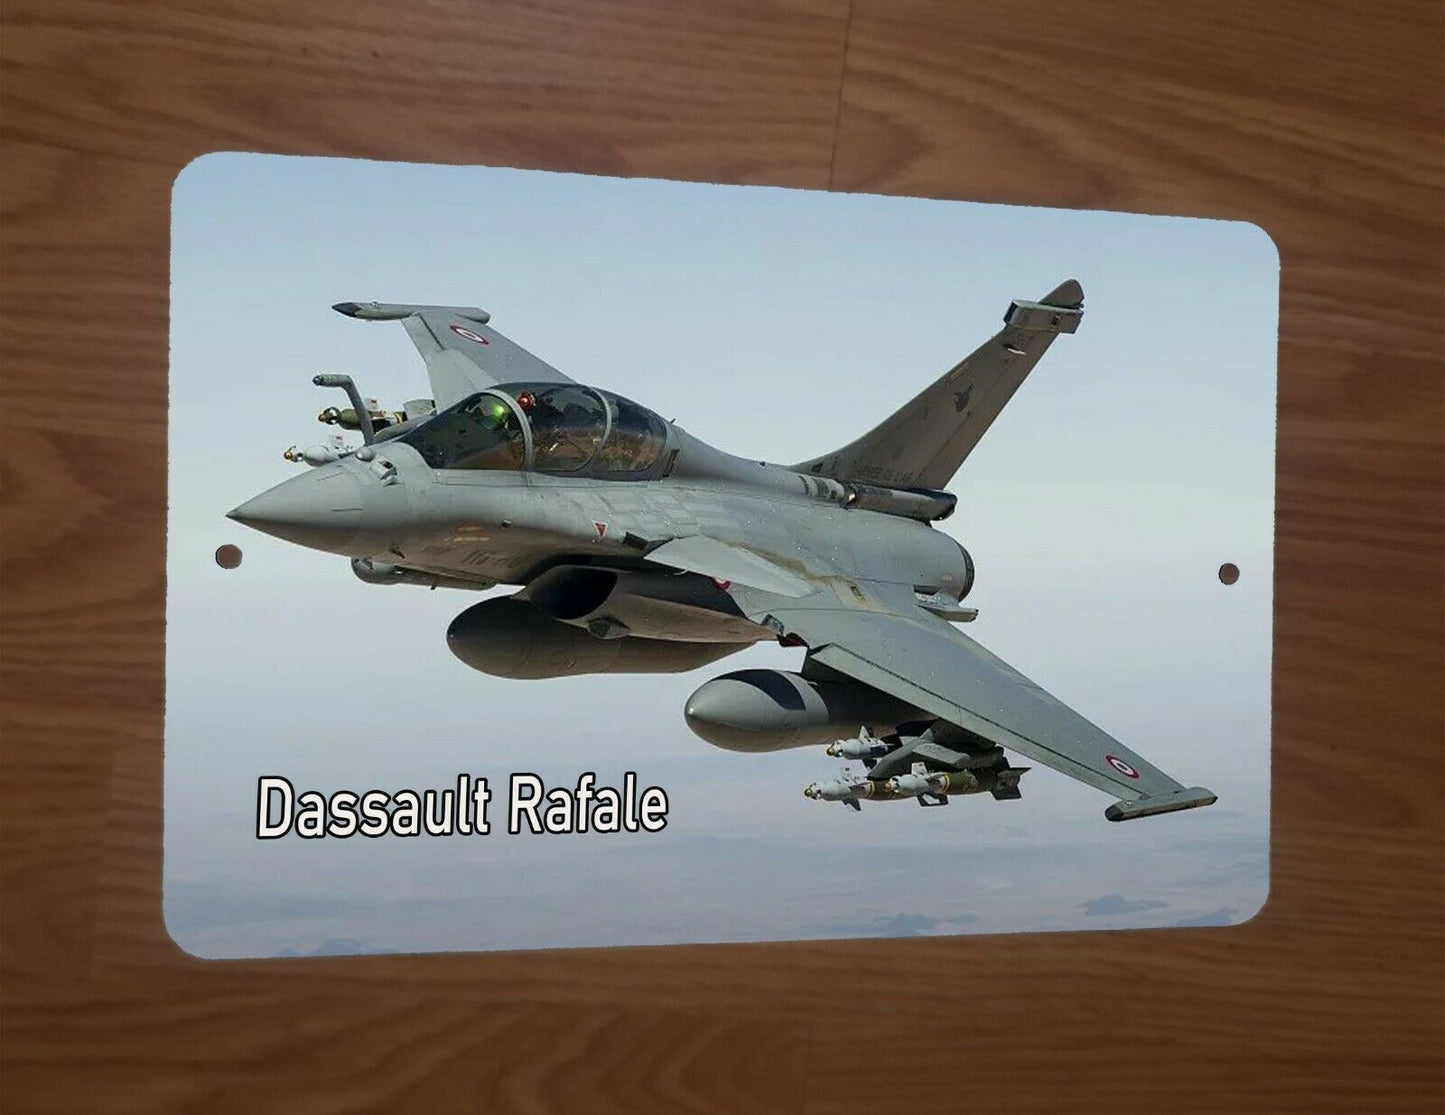 Dassault Rafale French Military Jet Fighter Airplane 8x12 Metal Wall Sign